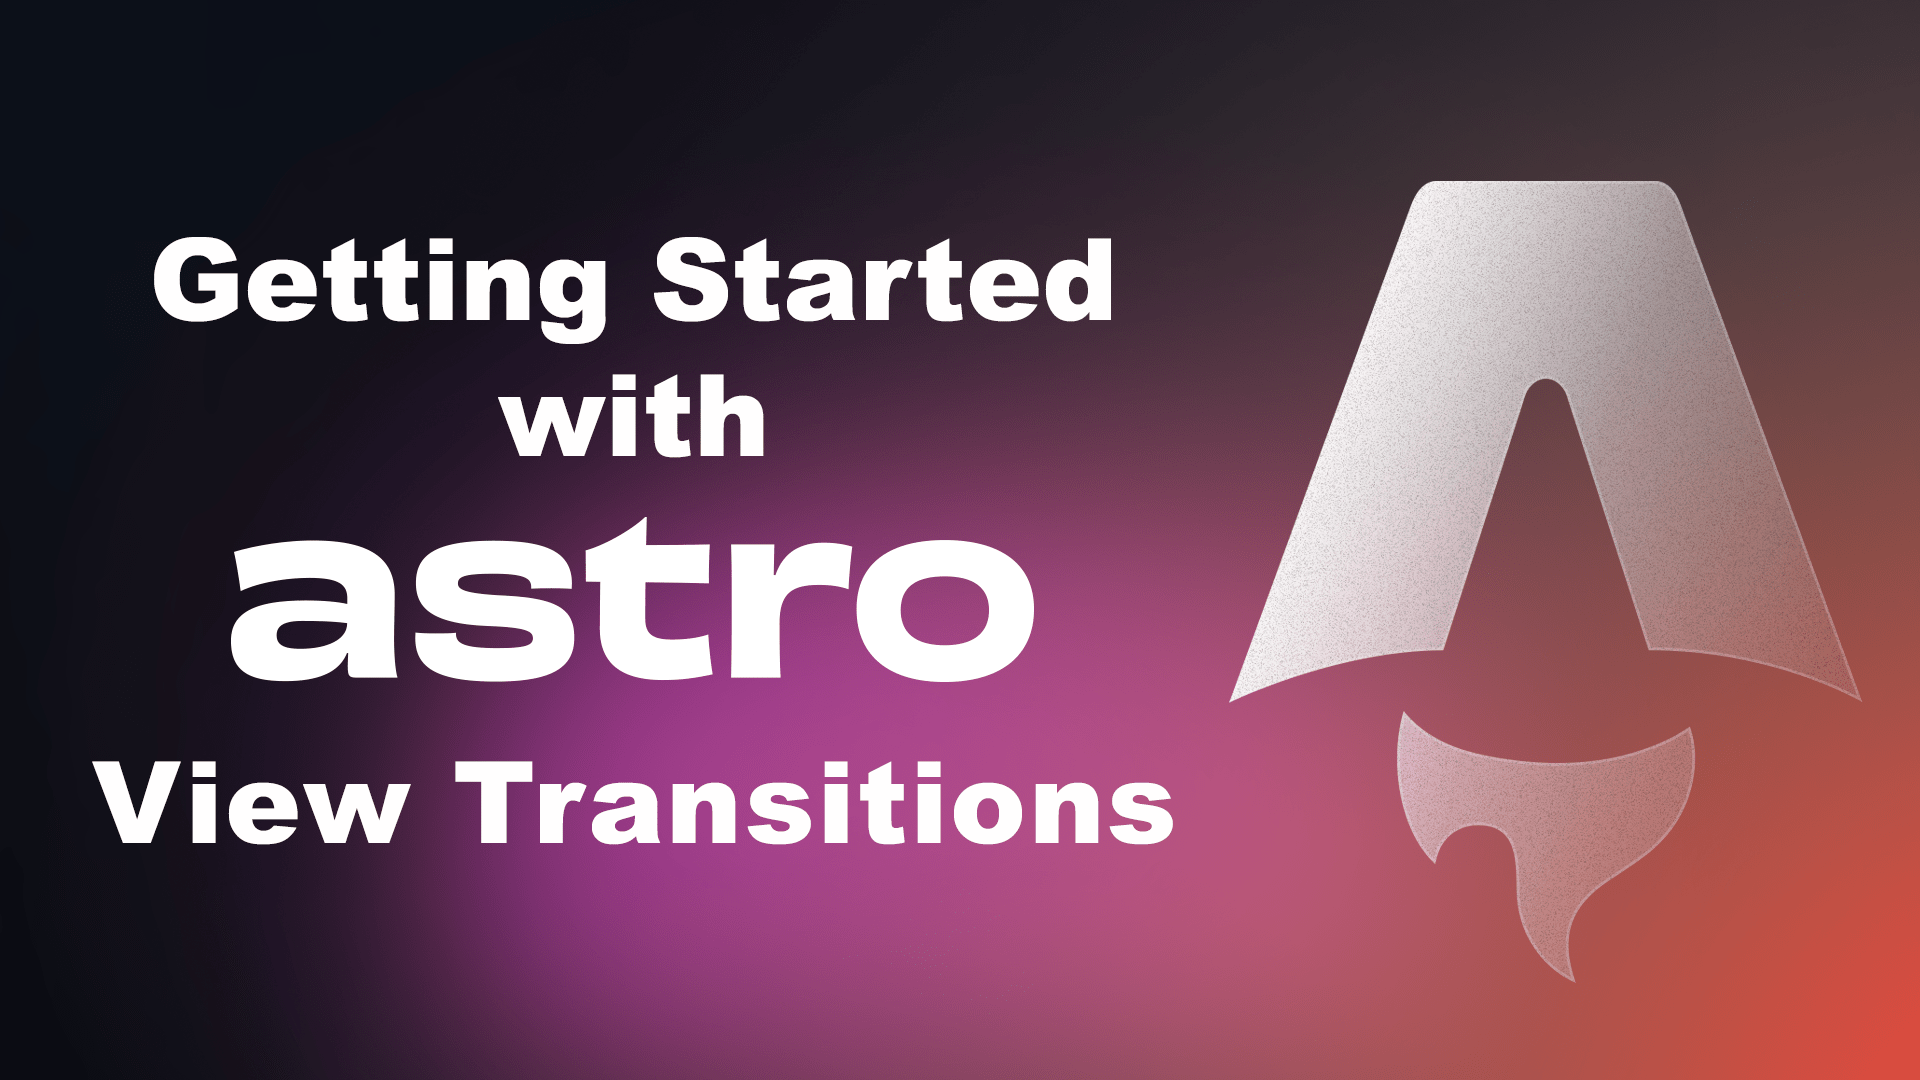 Getting Started with Astro View Transitions